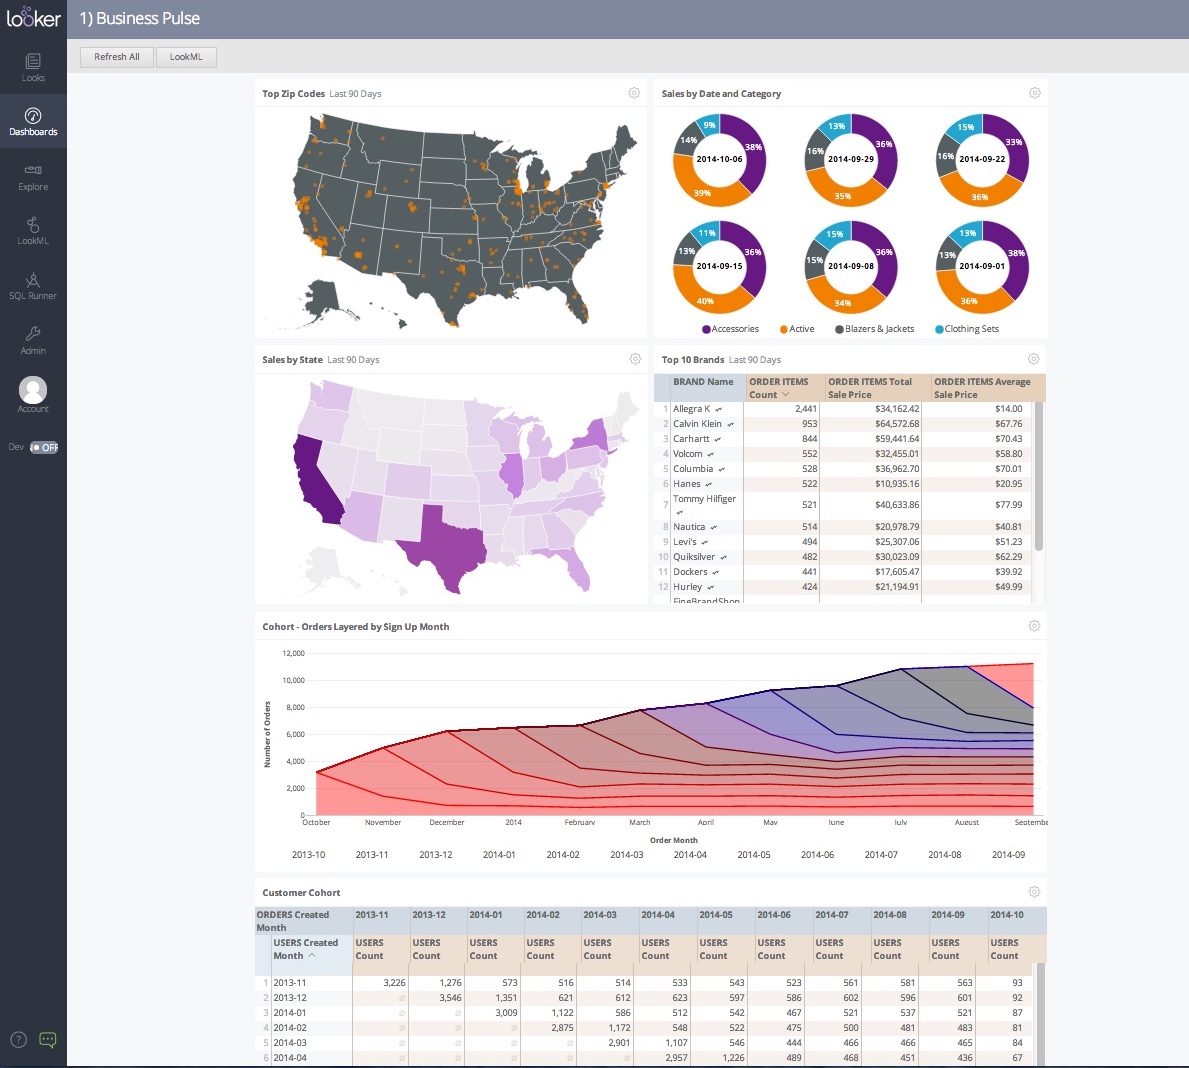 Sales data on the "Looker" dashboard including top zip codes, states, brands along with cohorts layered by sign-up month.